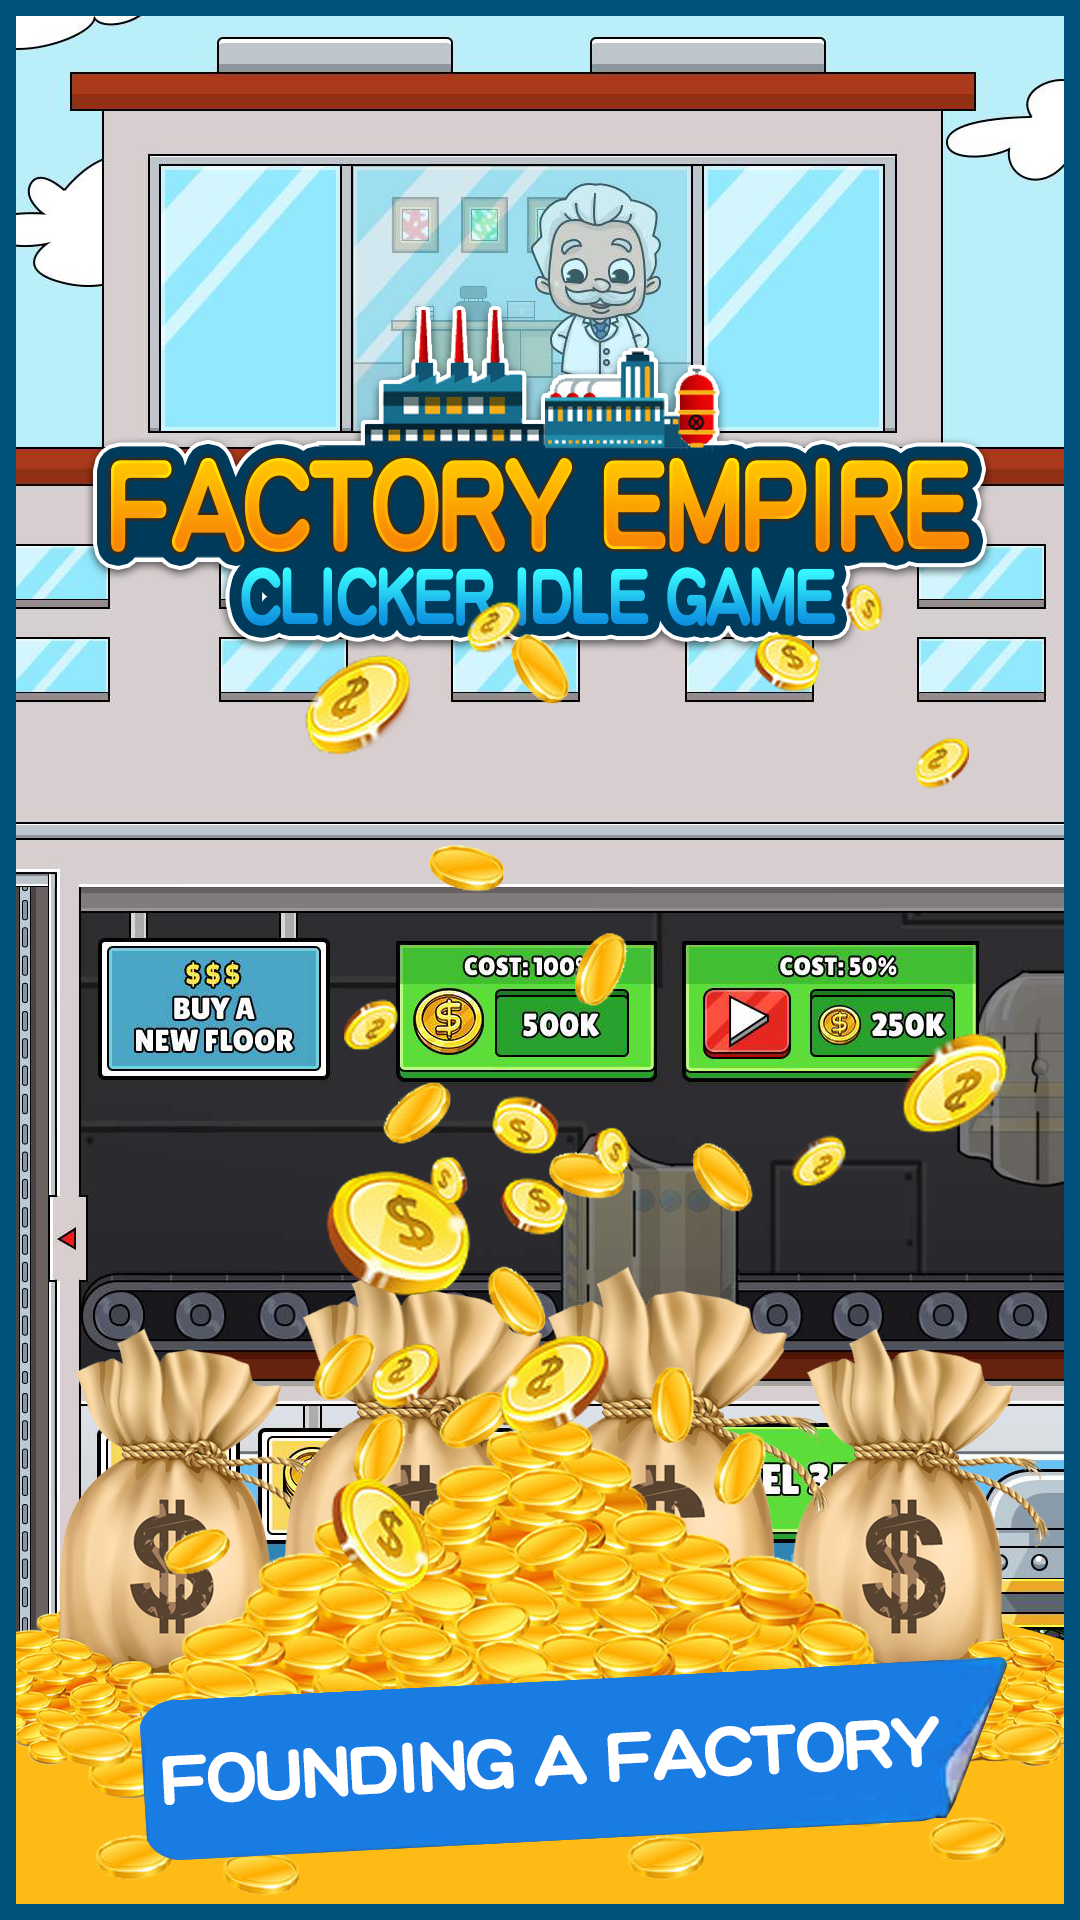 Screenshot 1 of Factory Empire - Clicker Idle Game 1.1.1